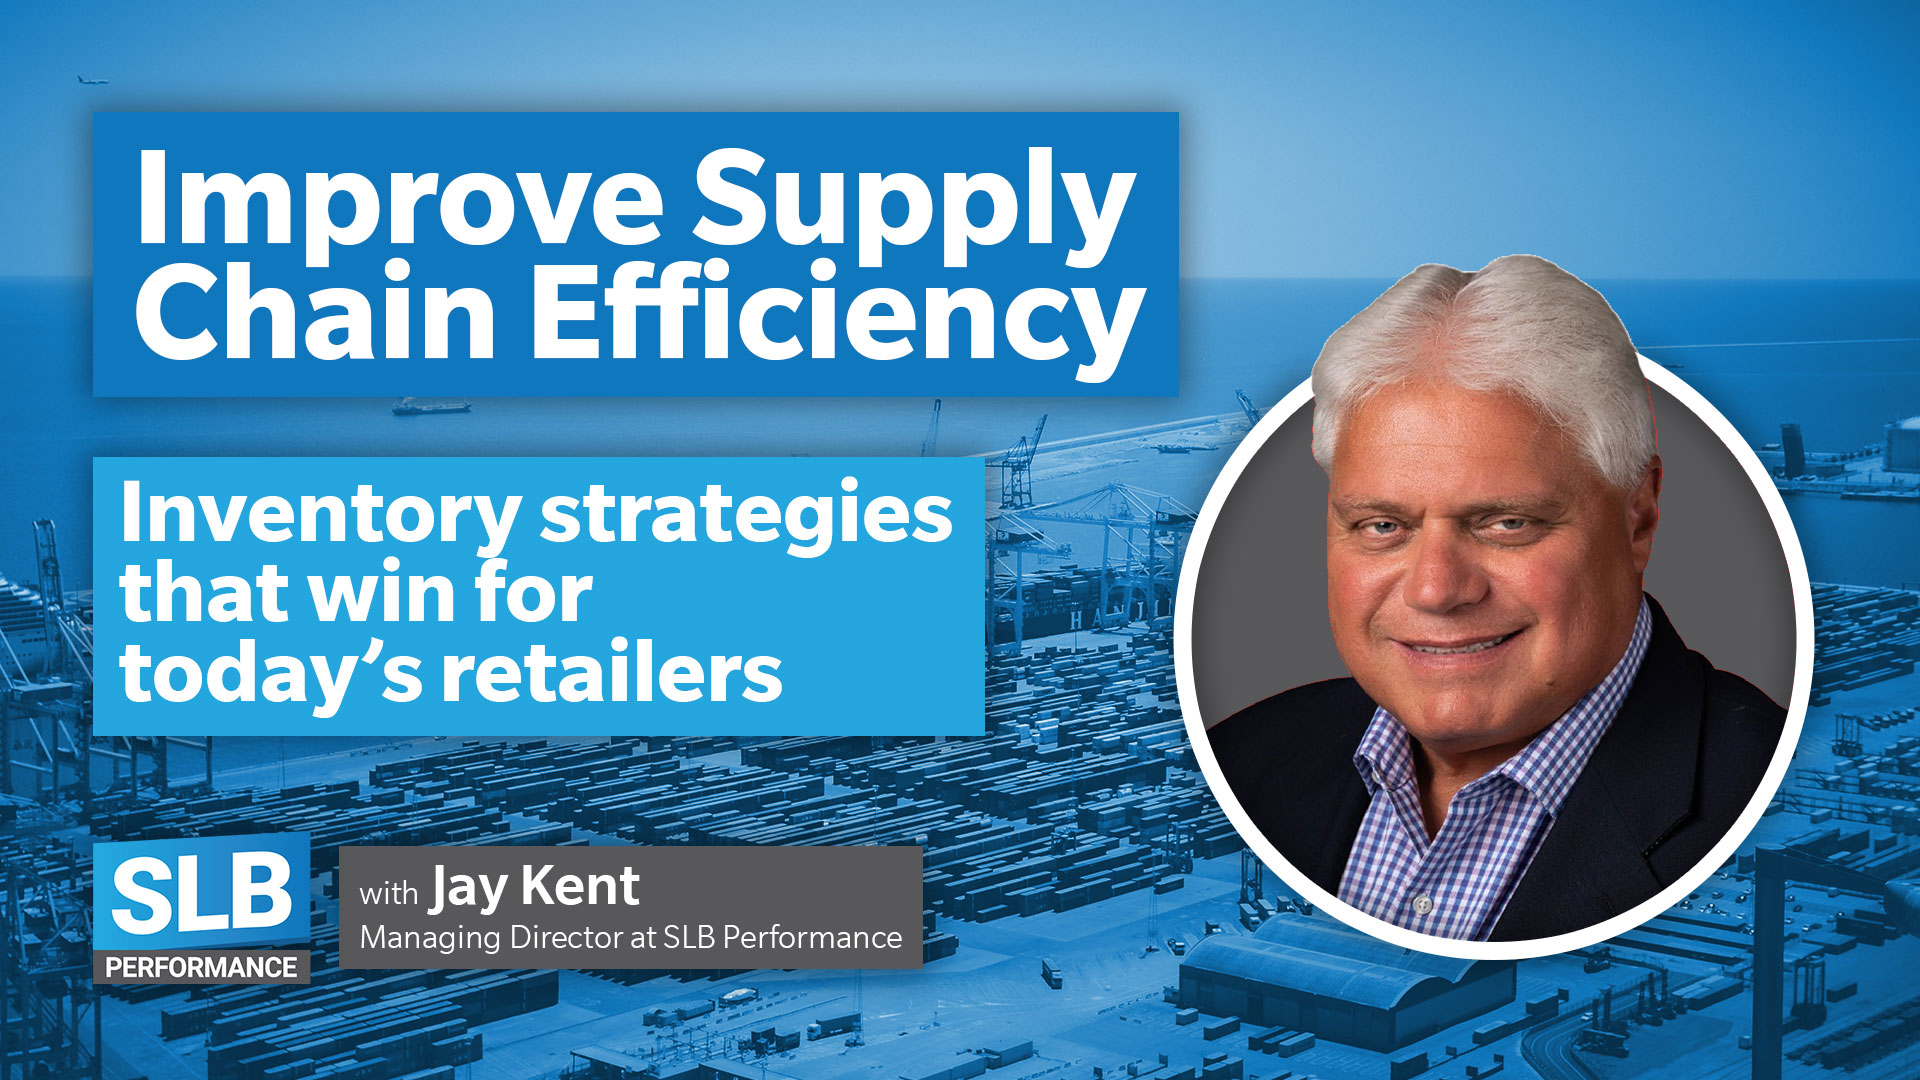 Inventory strategies that win for today’s retailers